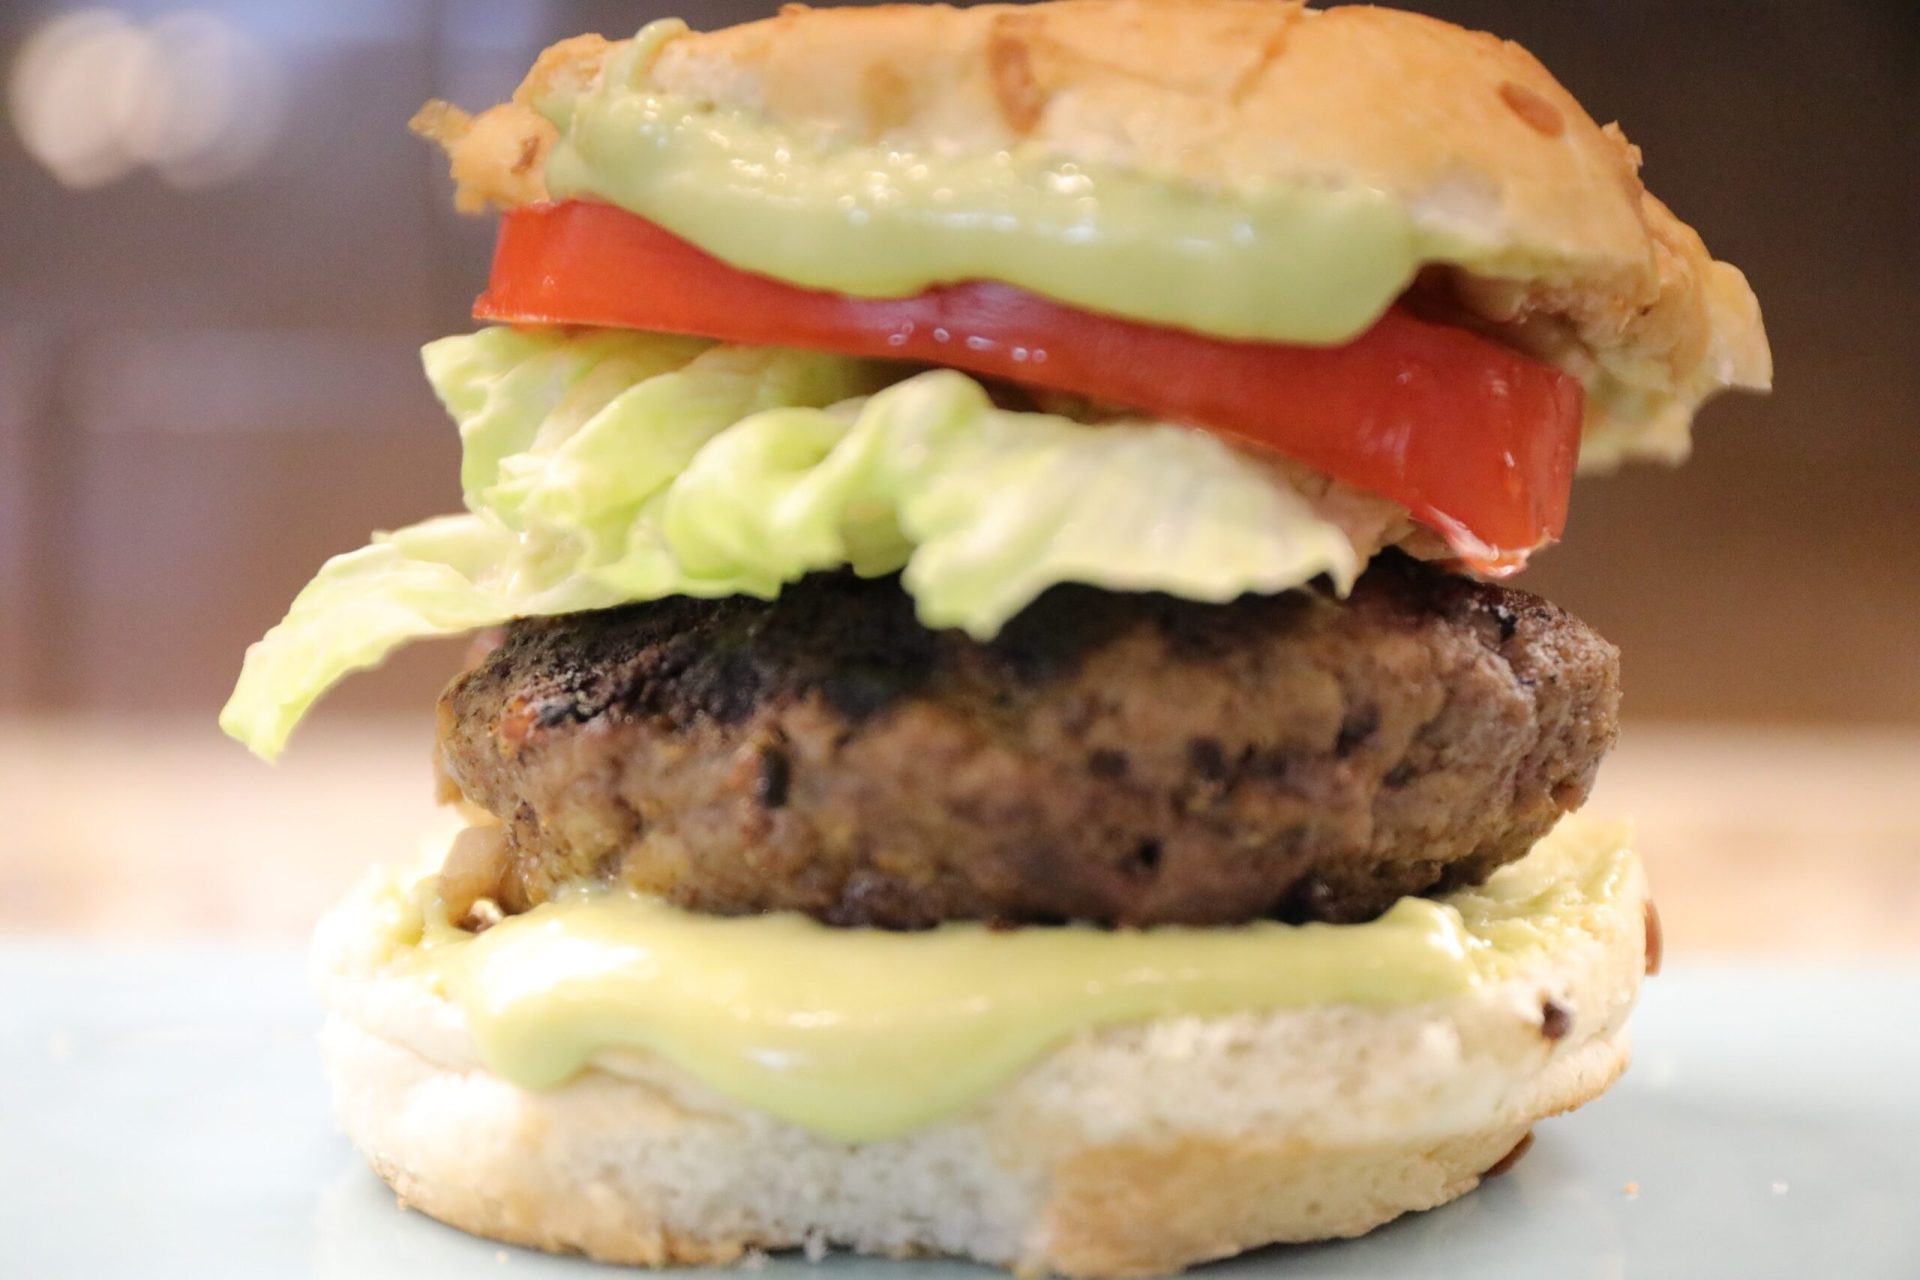 A hamburger with lettuce, tomato and mayonnaise on it.